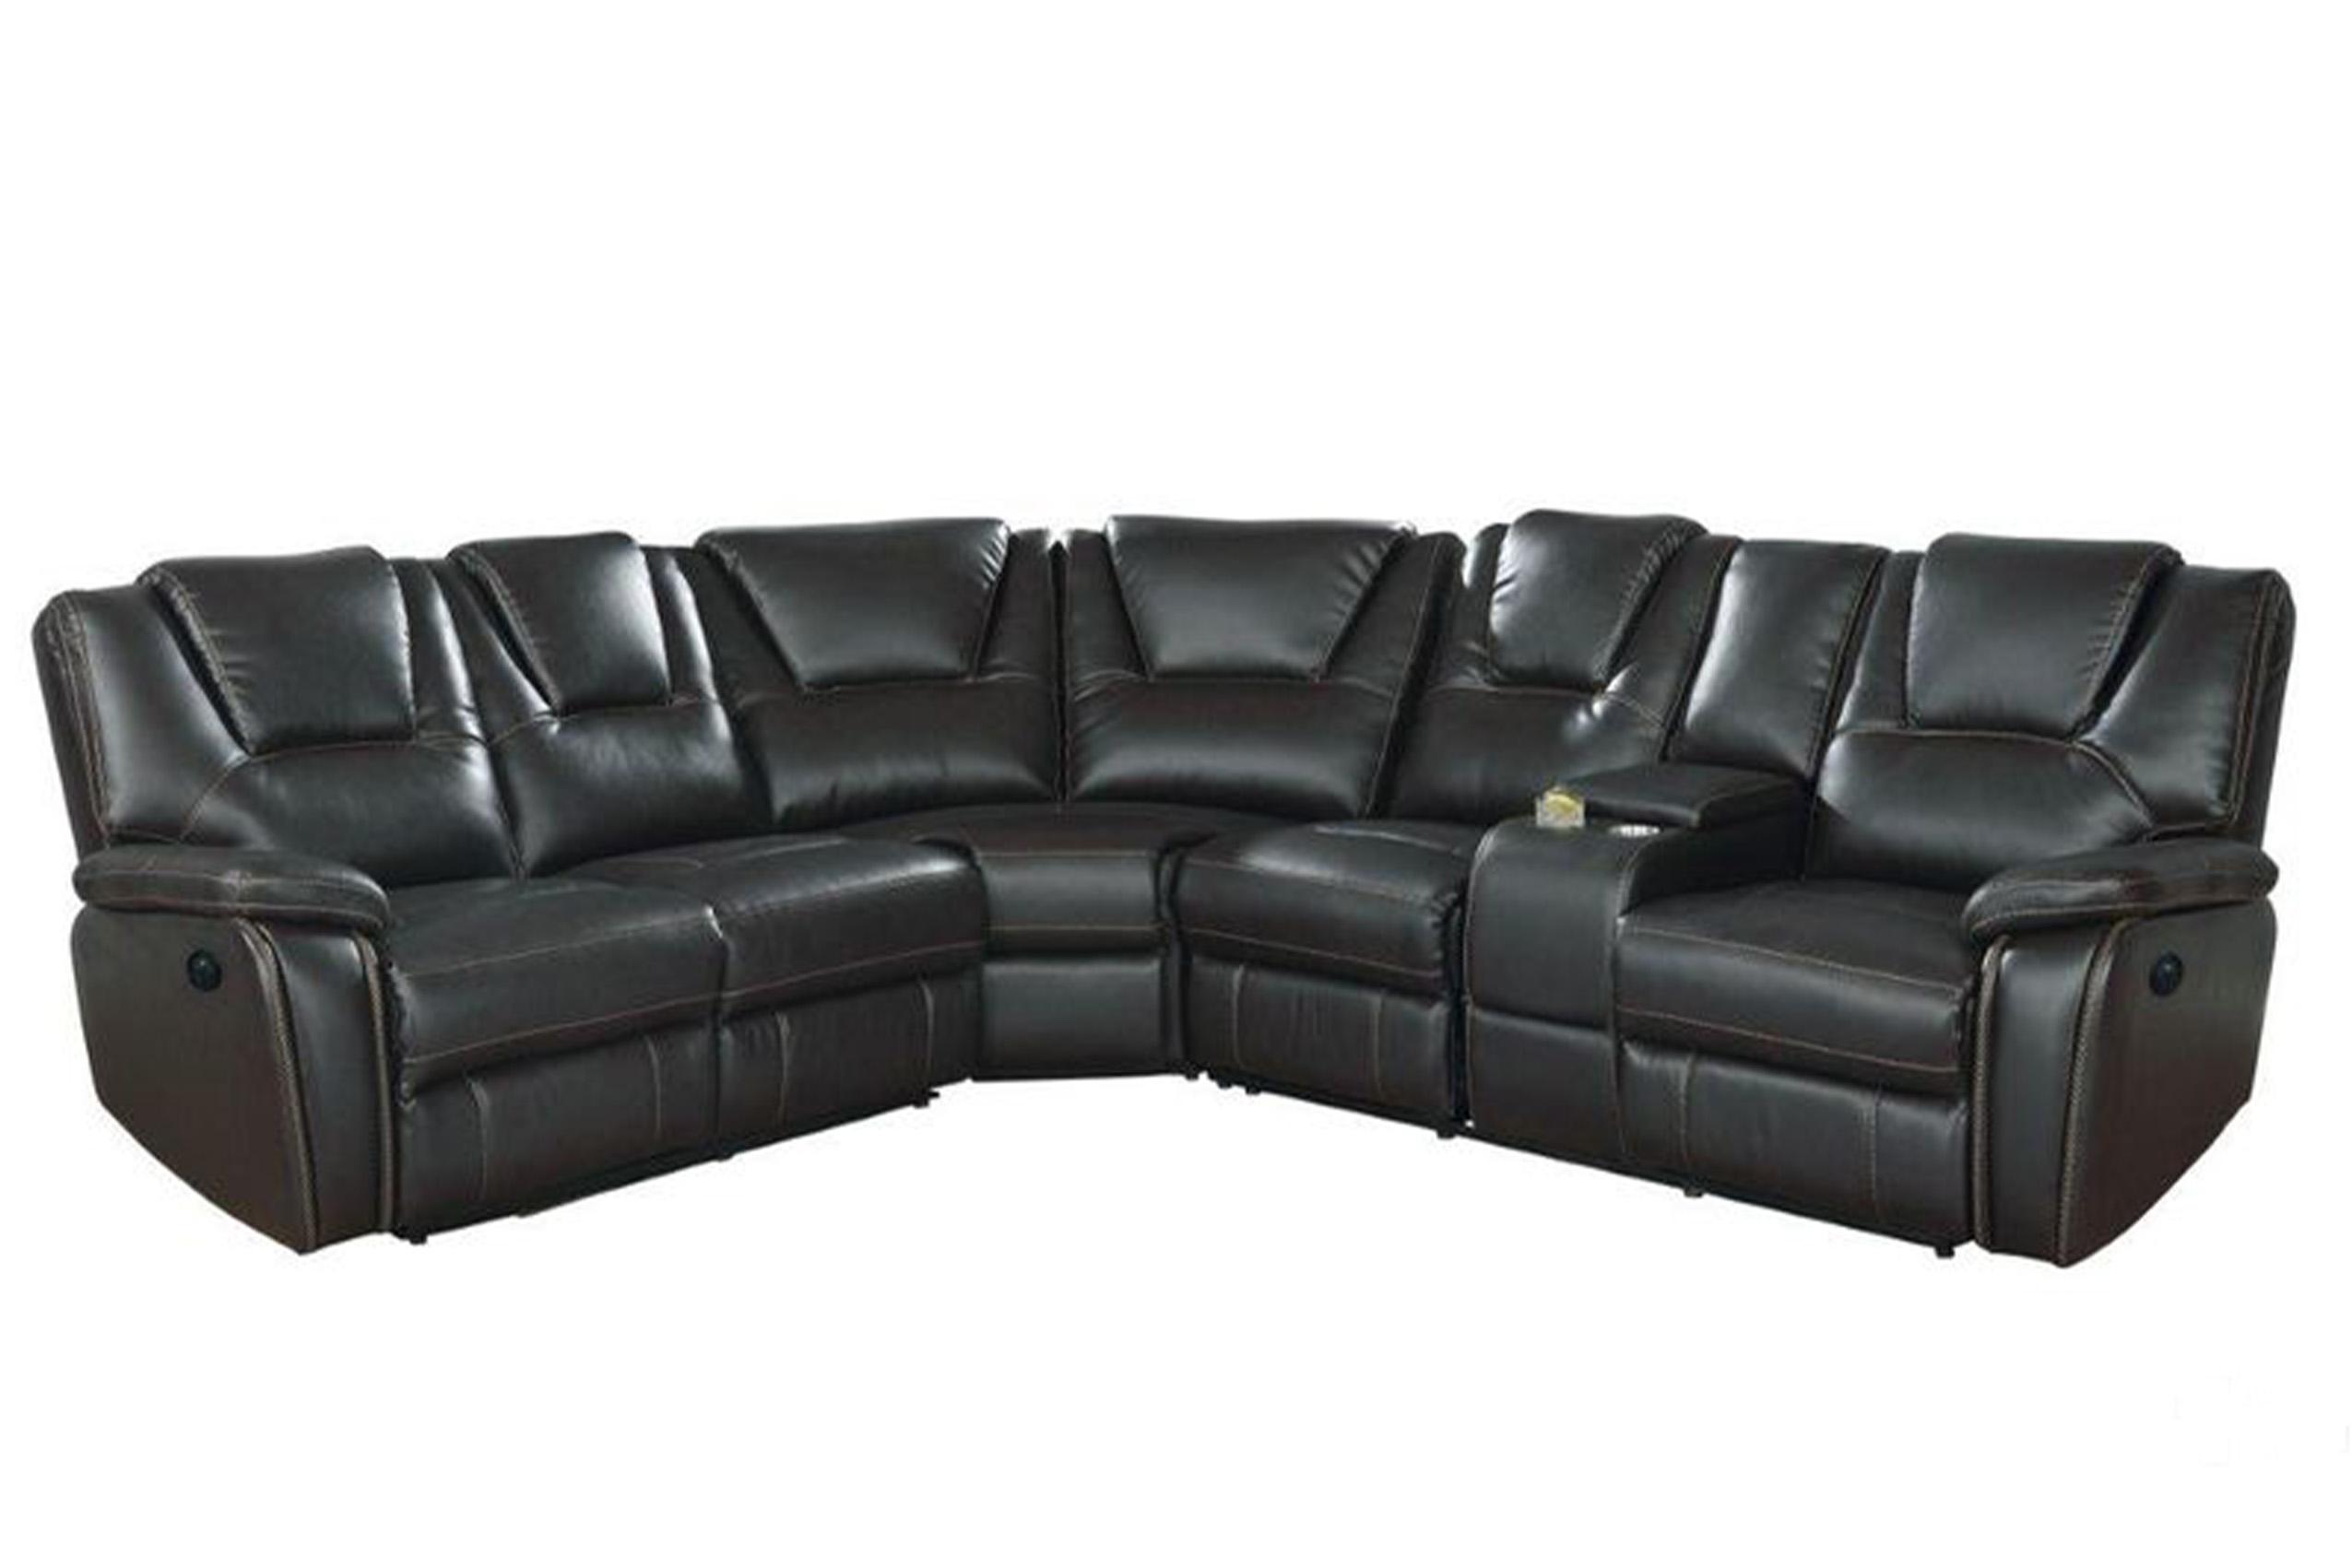 Contemporary, Modern Reclining Sectional Hong Kong QB13318050 in Black Eco Leather